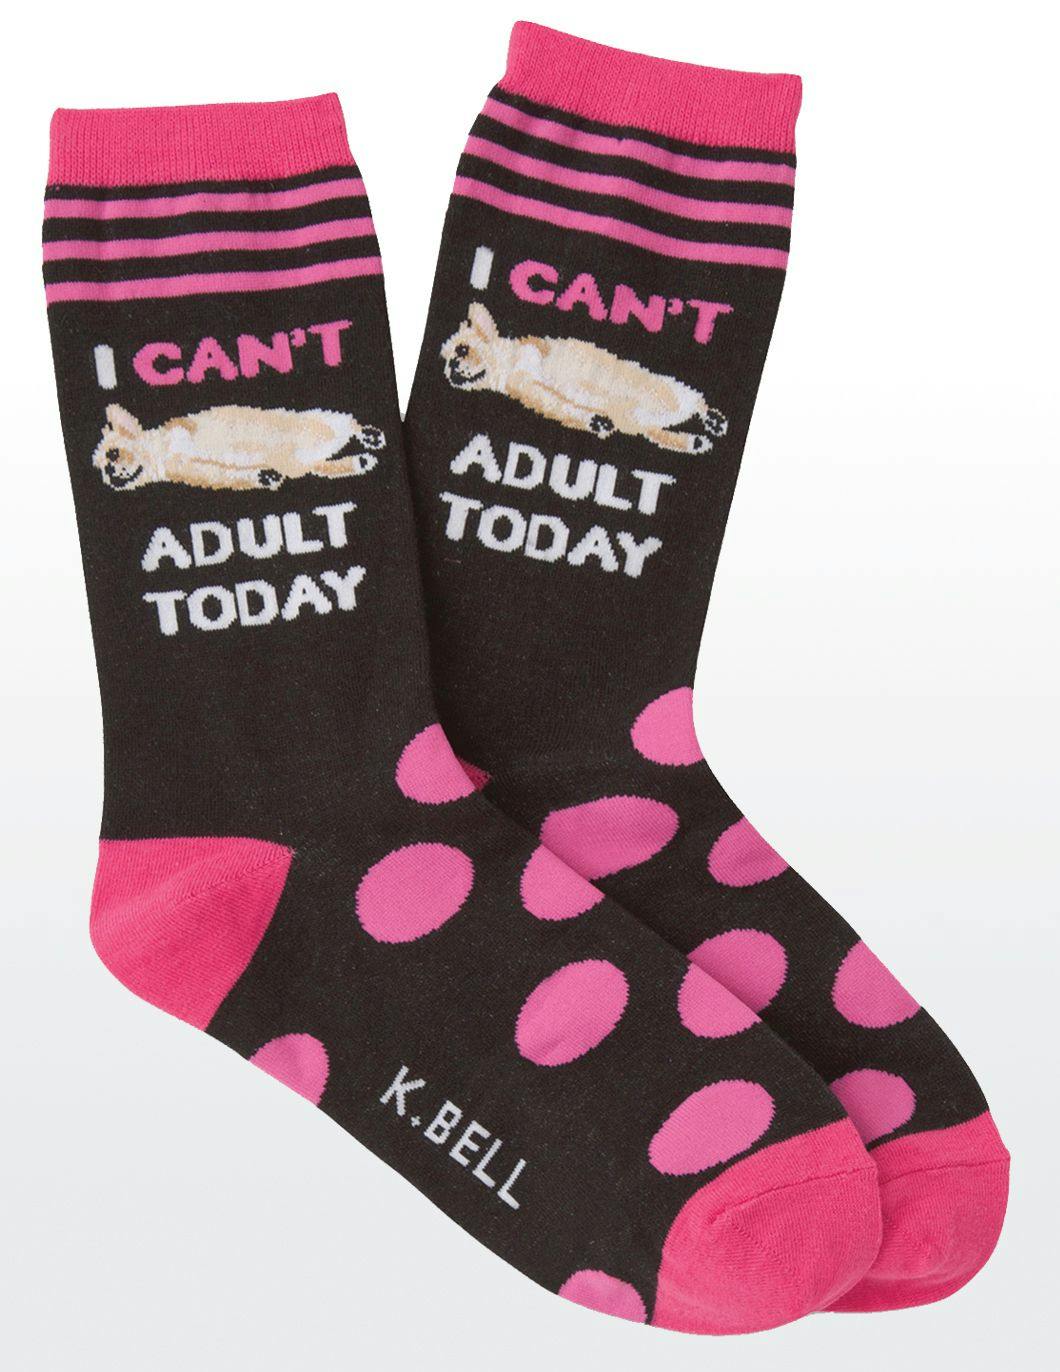 kbell-womens-i-cant-adult-today-print-socks